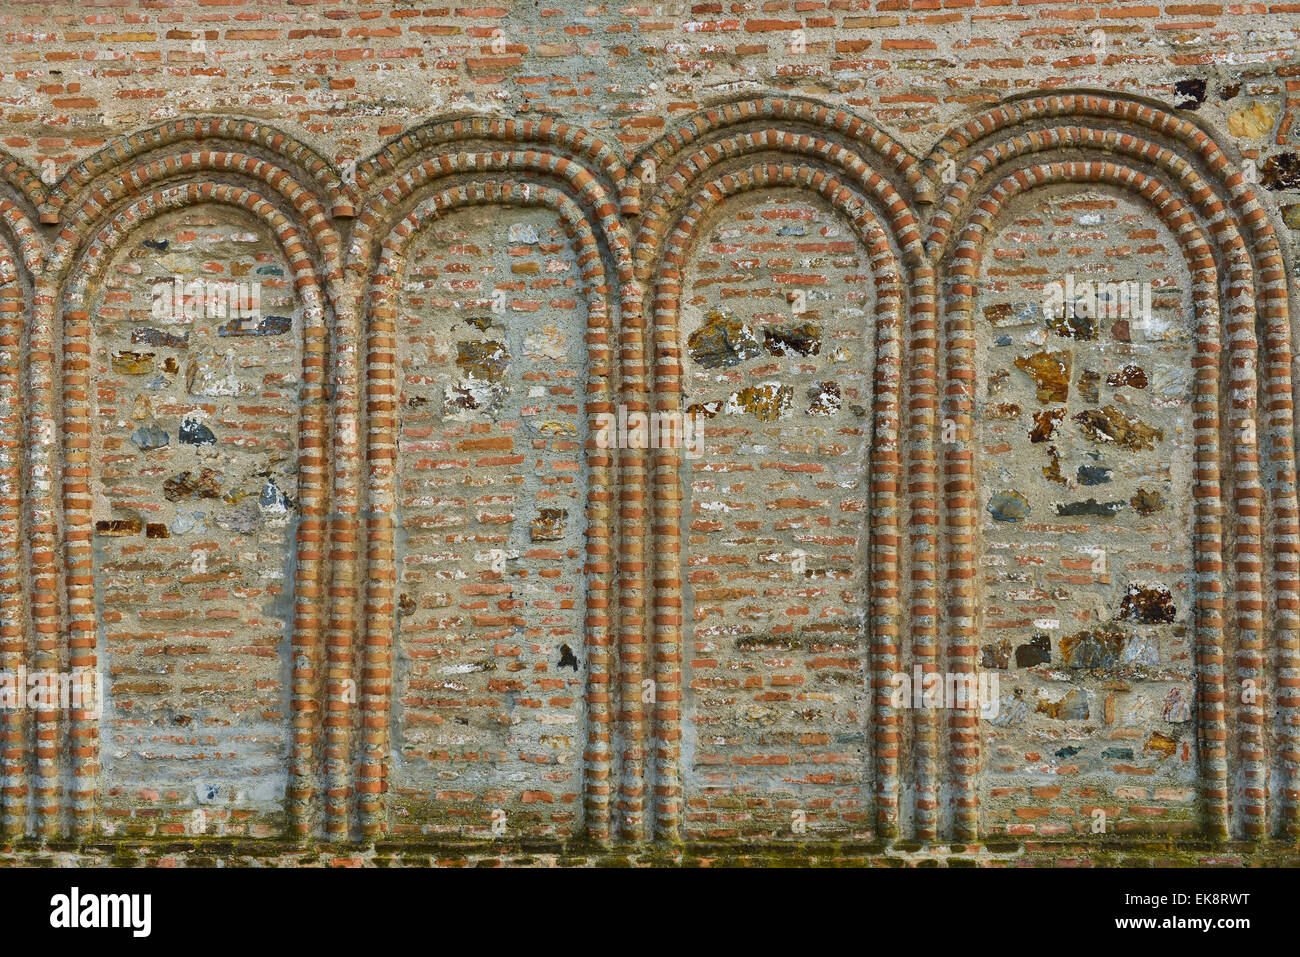 Stone arches on a ancient wall Stock Photo